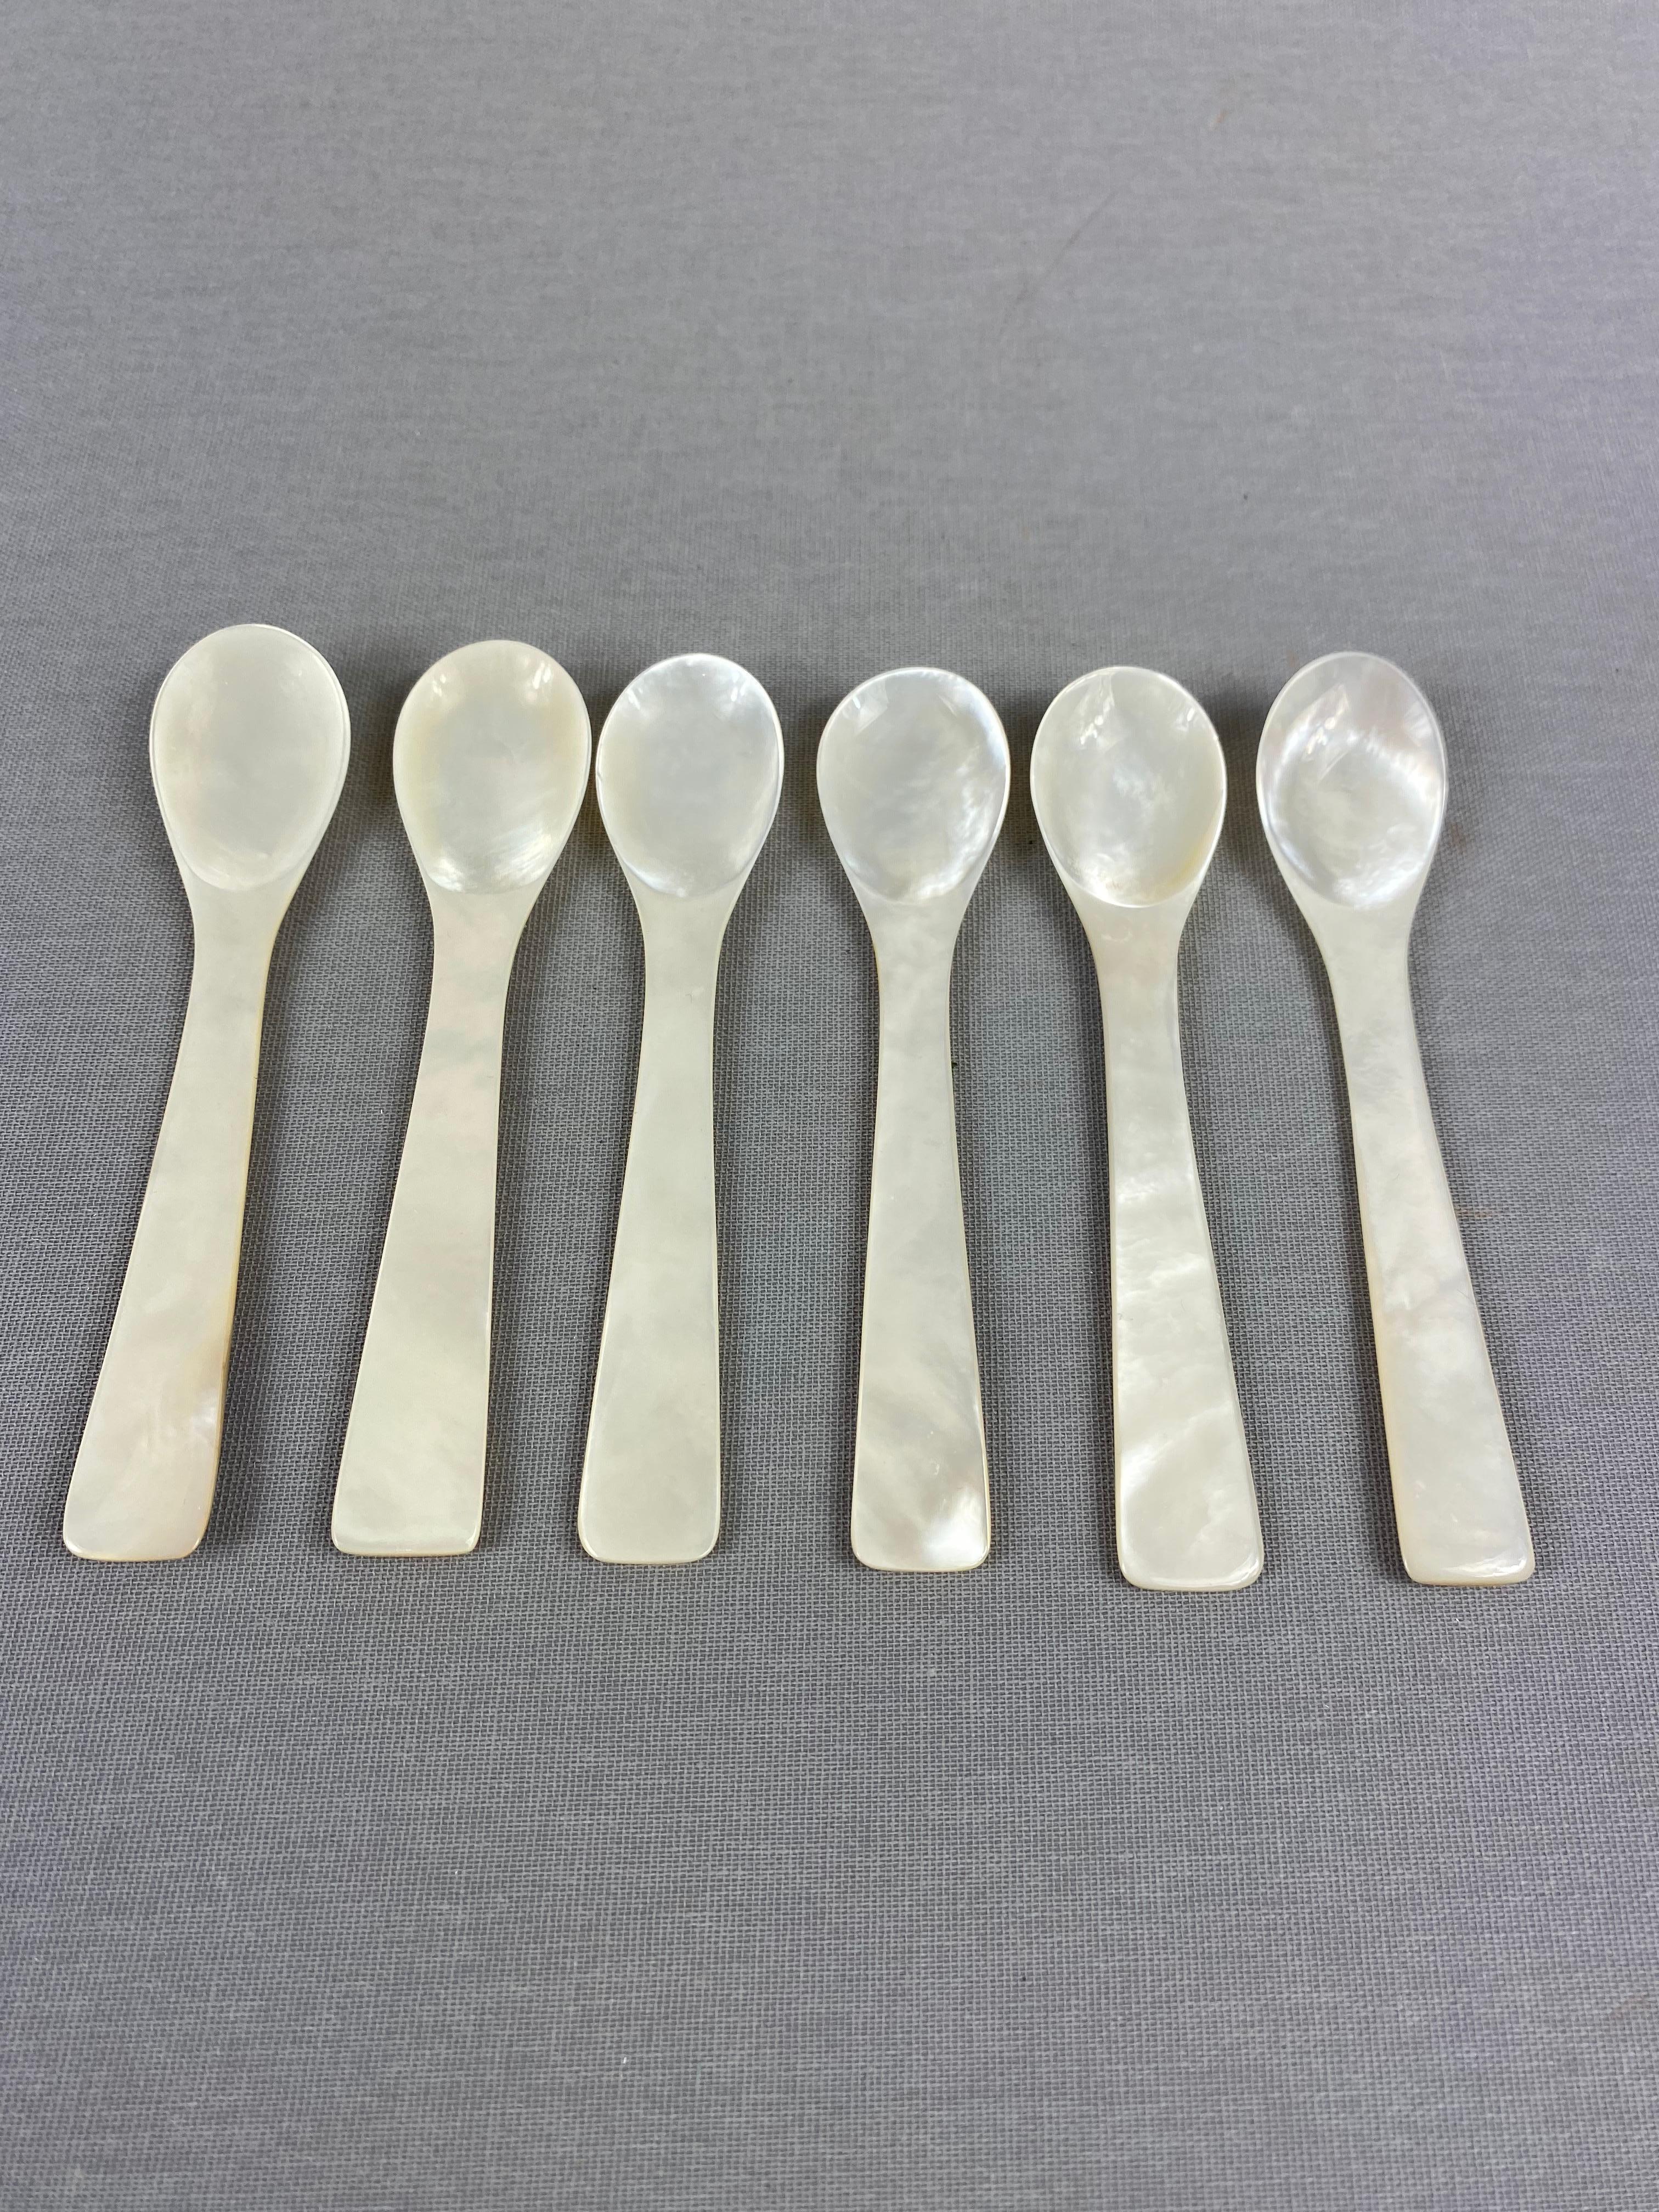 Large set of caviar spoons and butterknives and serving cup holder shells, 1960.

A beautiful large mother of pearls set from 20 spoons (4.72in.), 8 butter knifes (4.72in), 1 large spoon (6.49in) an 9 beautiful shell serving cup holders.

Very